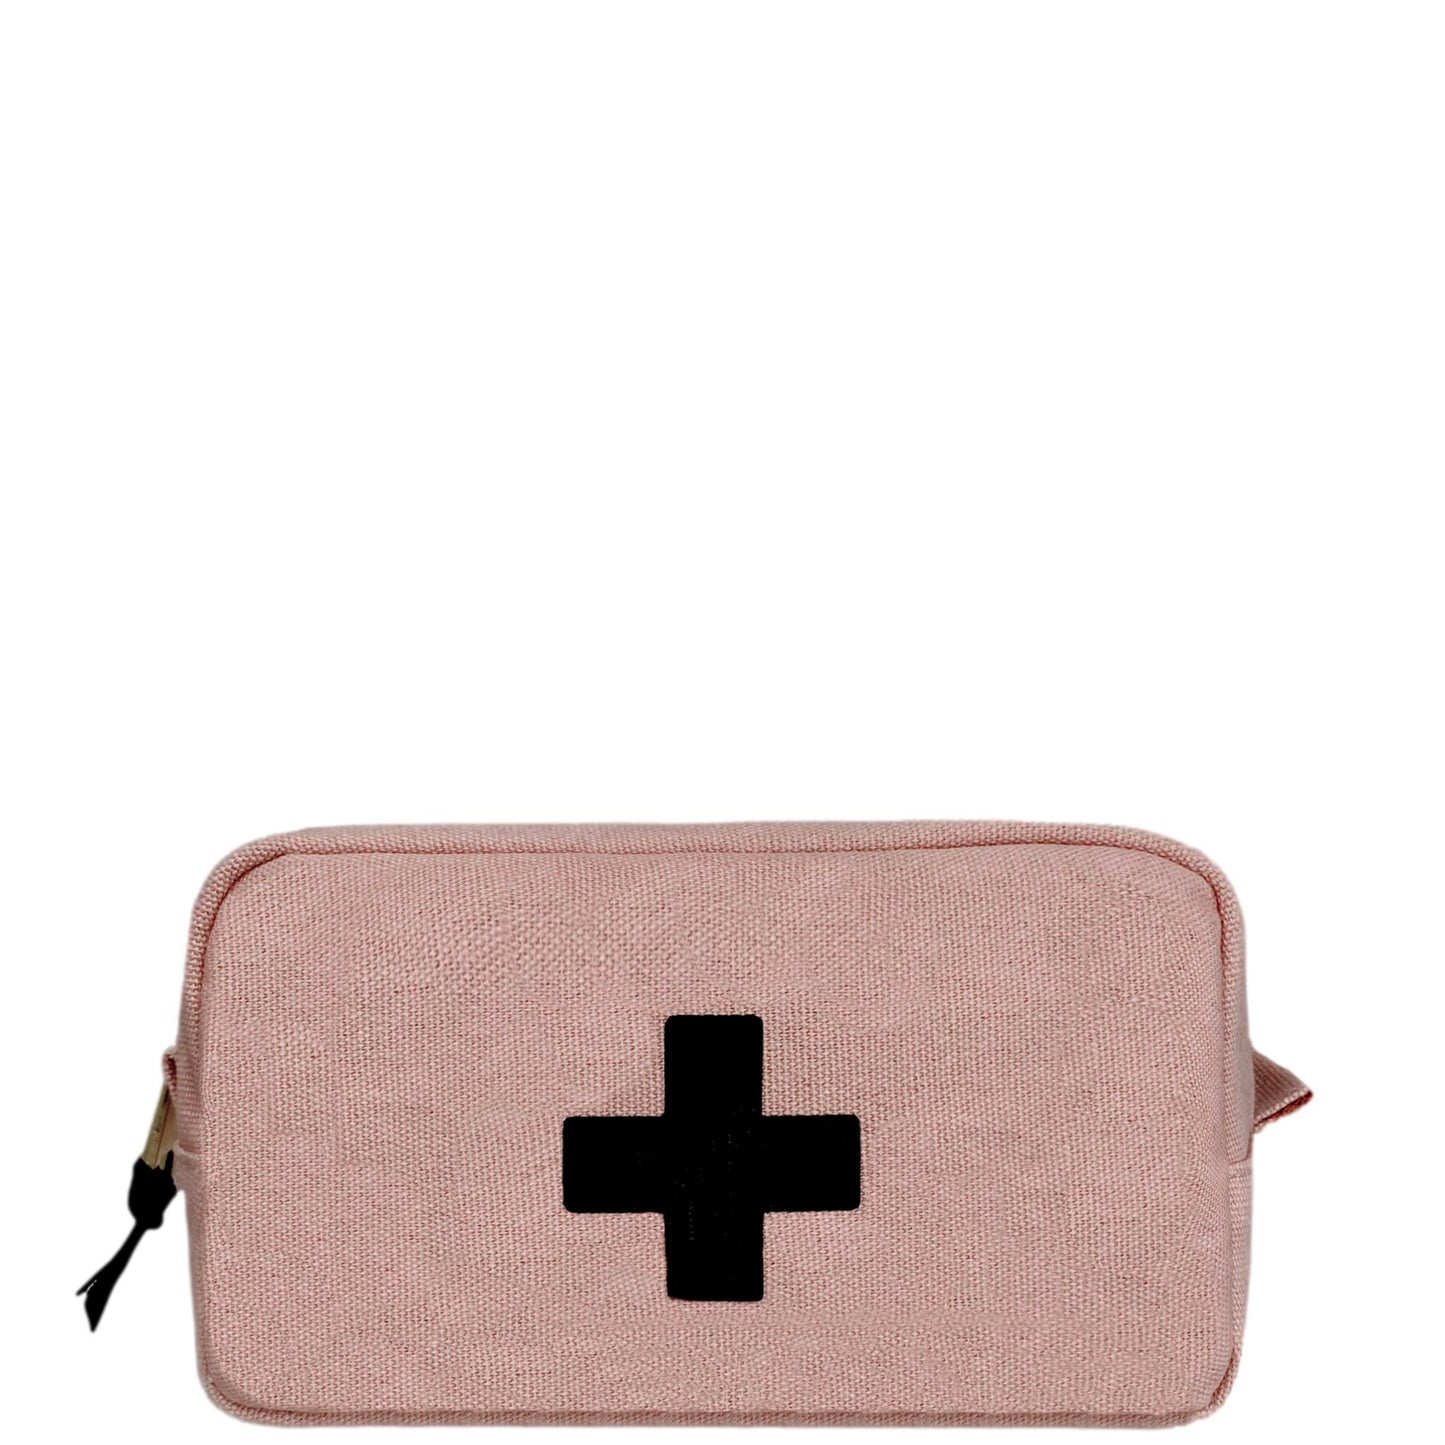 First Aid Organizing Case - Pink - Bag-all Europe